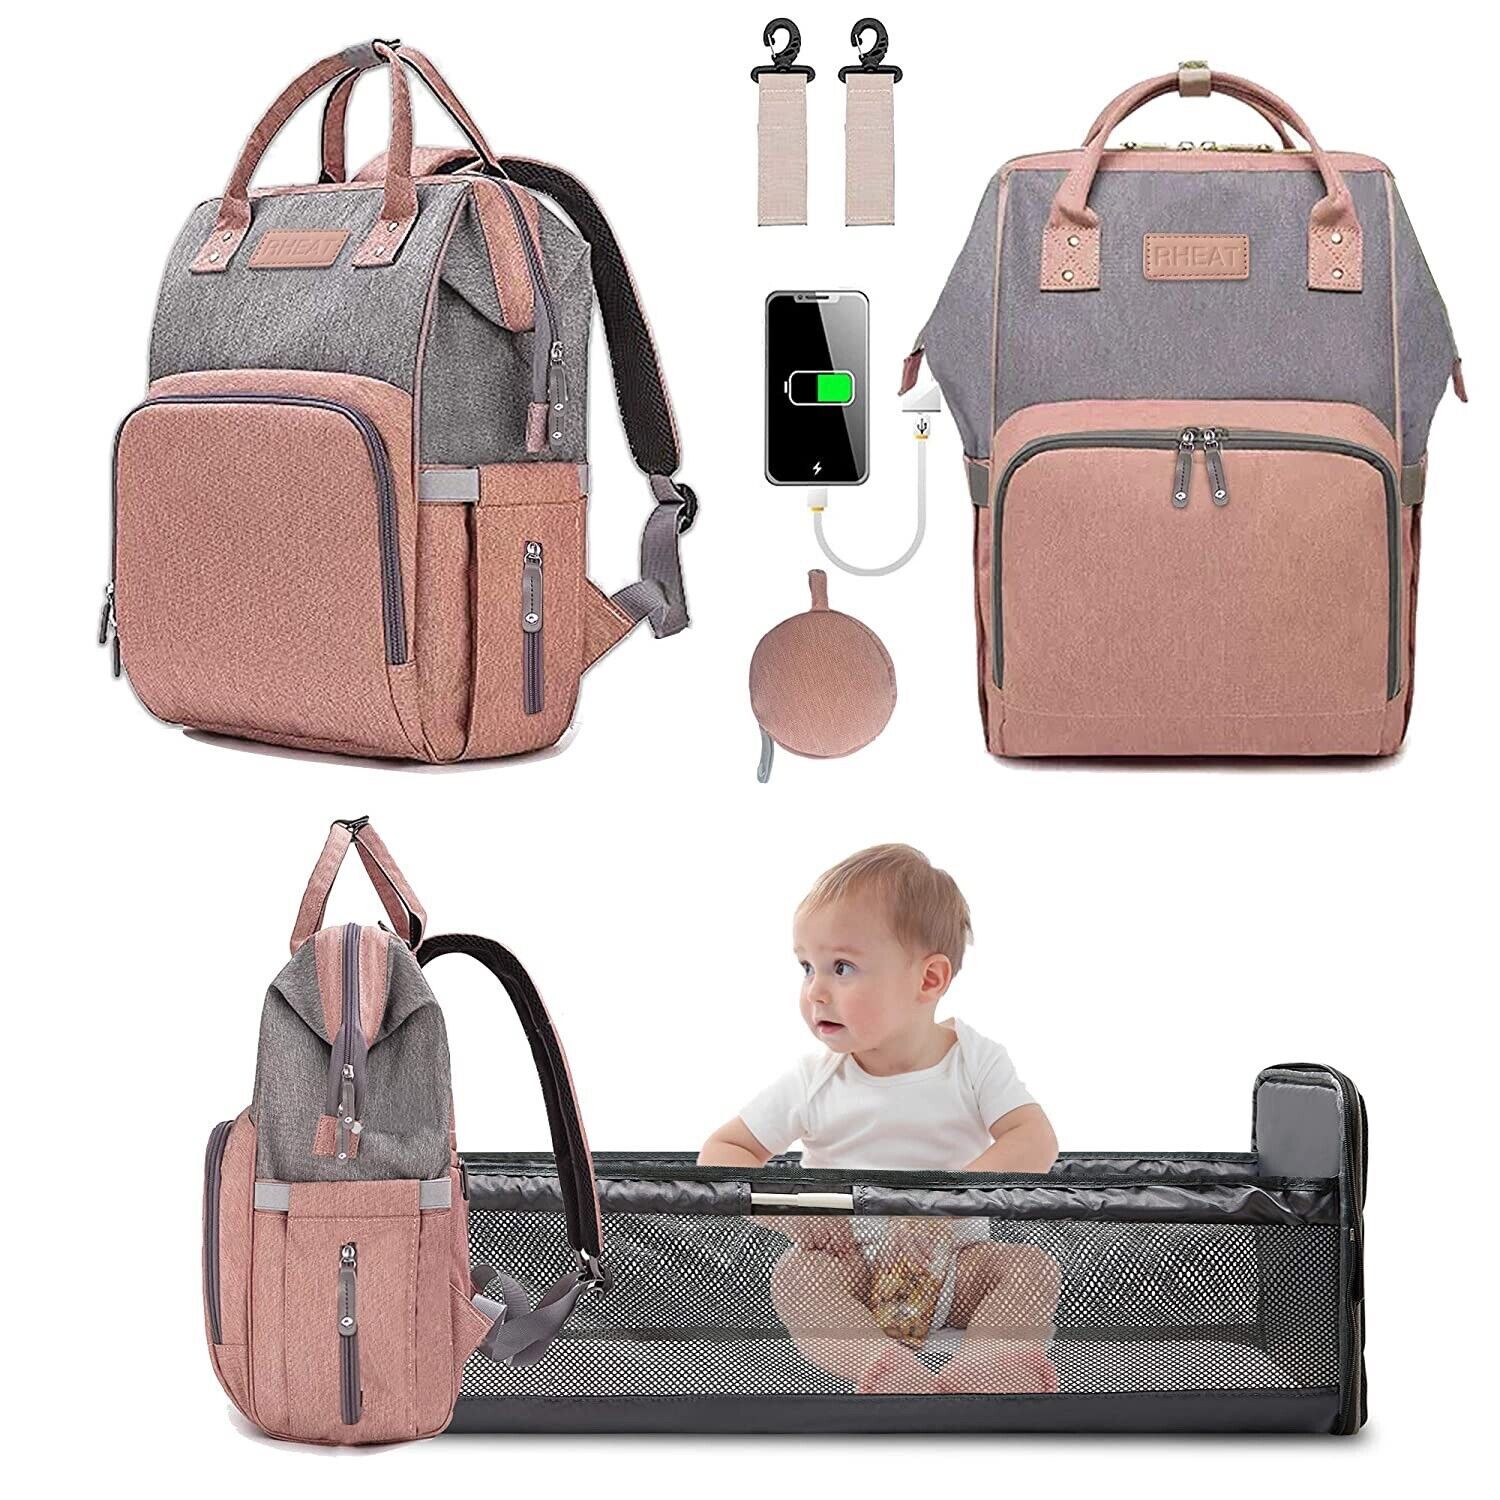 Diaper Bag 3 in 1 Backpack with USB Charge Port, Portable Baby Bed Diaper Bag